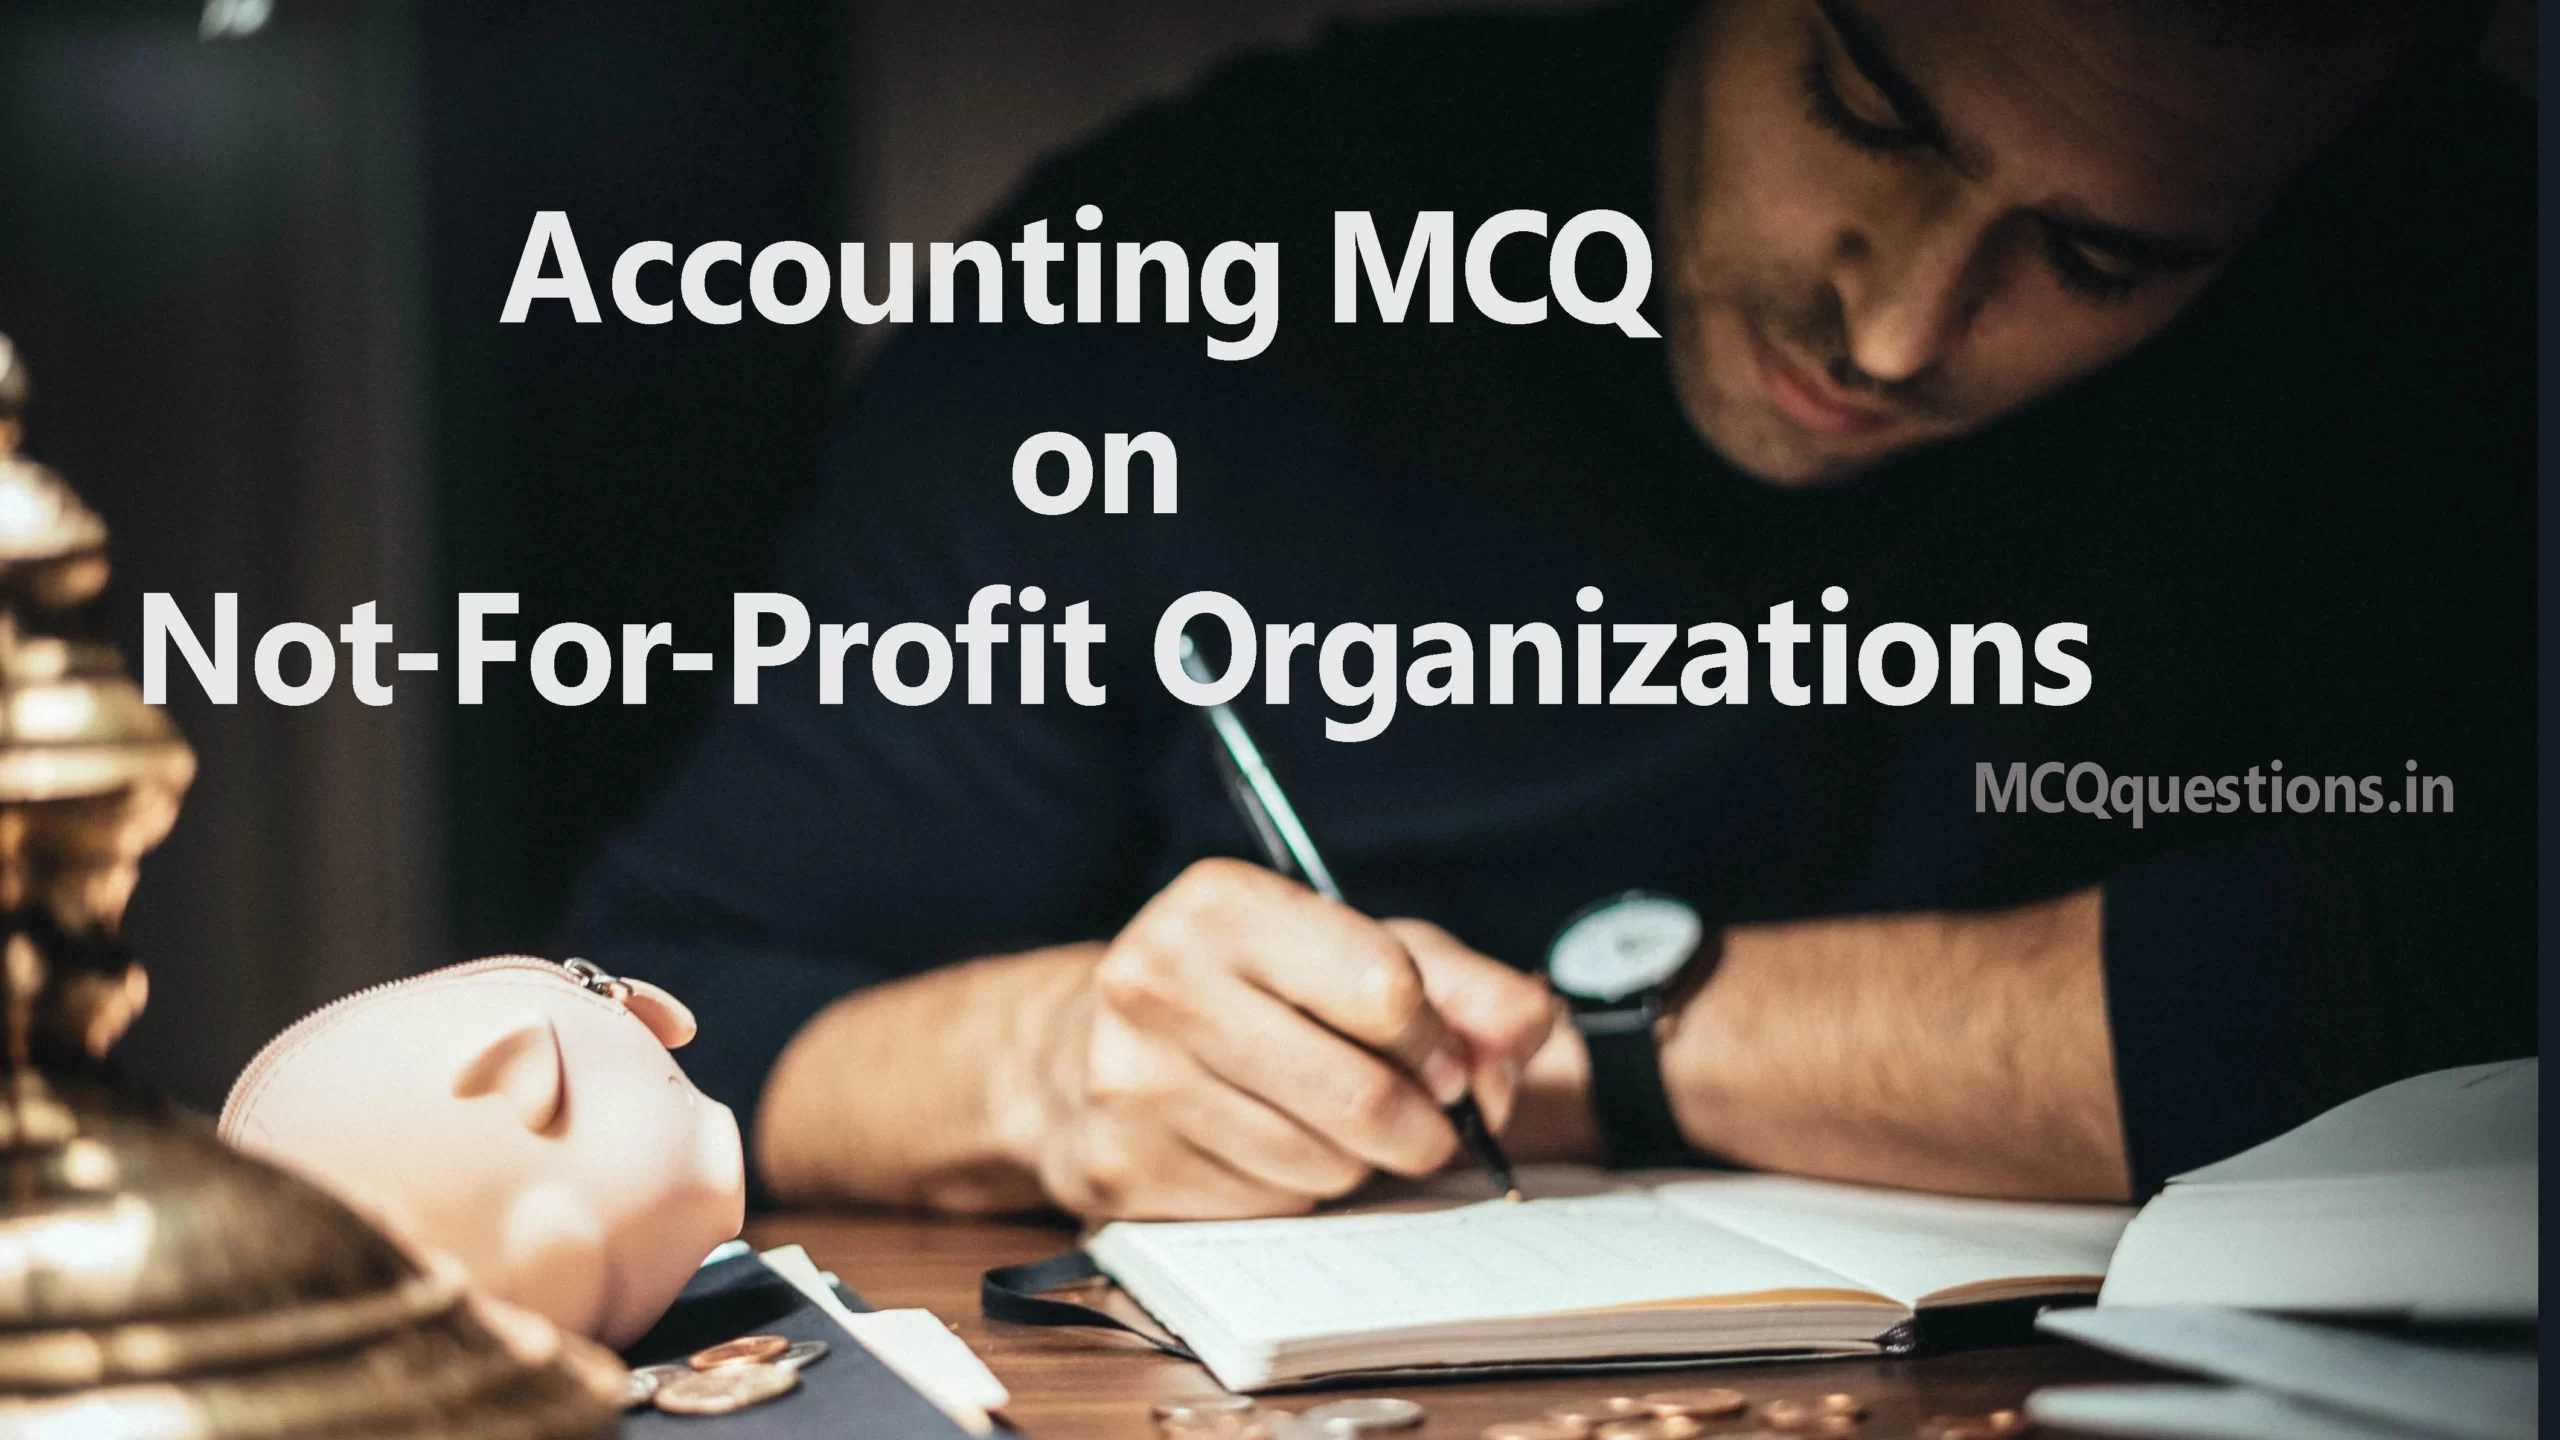 Accounting MCQ on Not-For-Profit Organizations